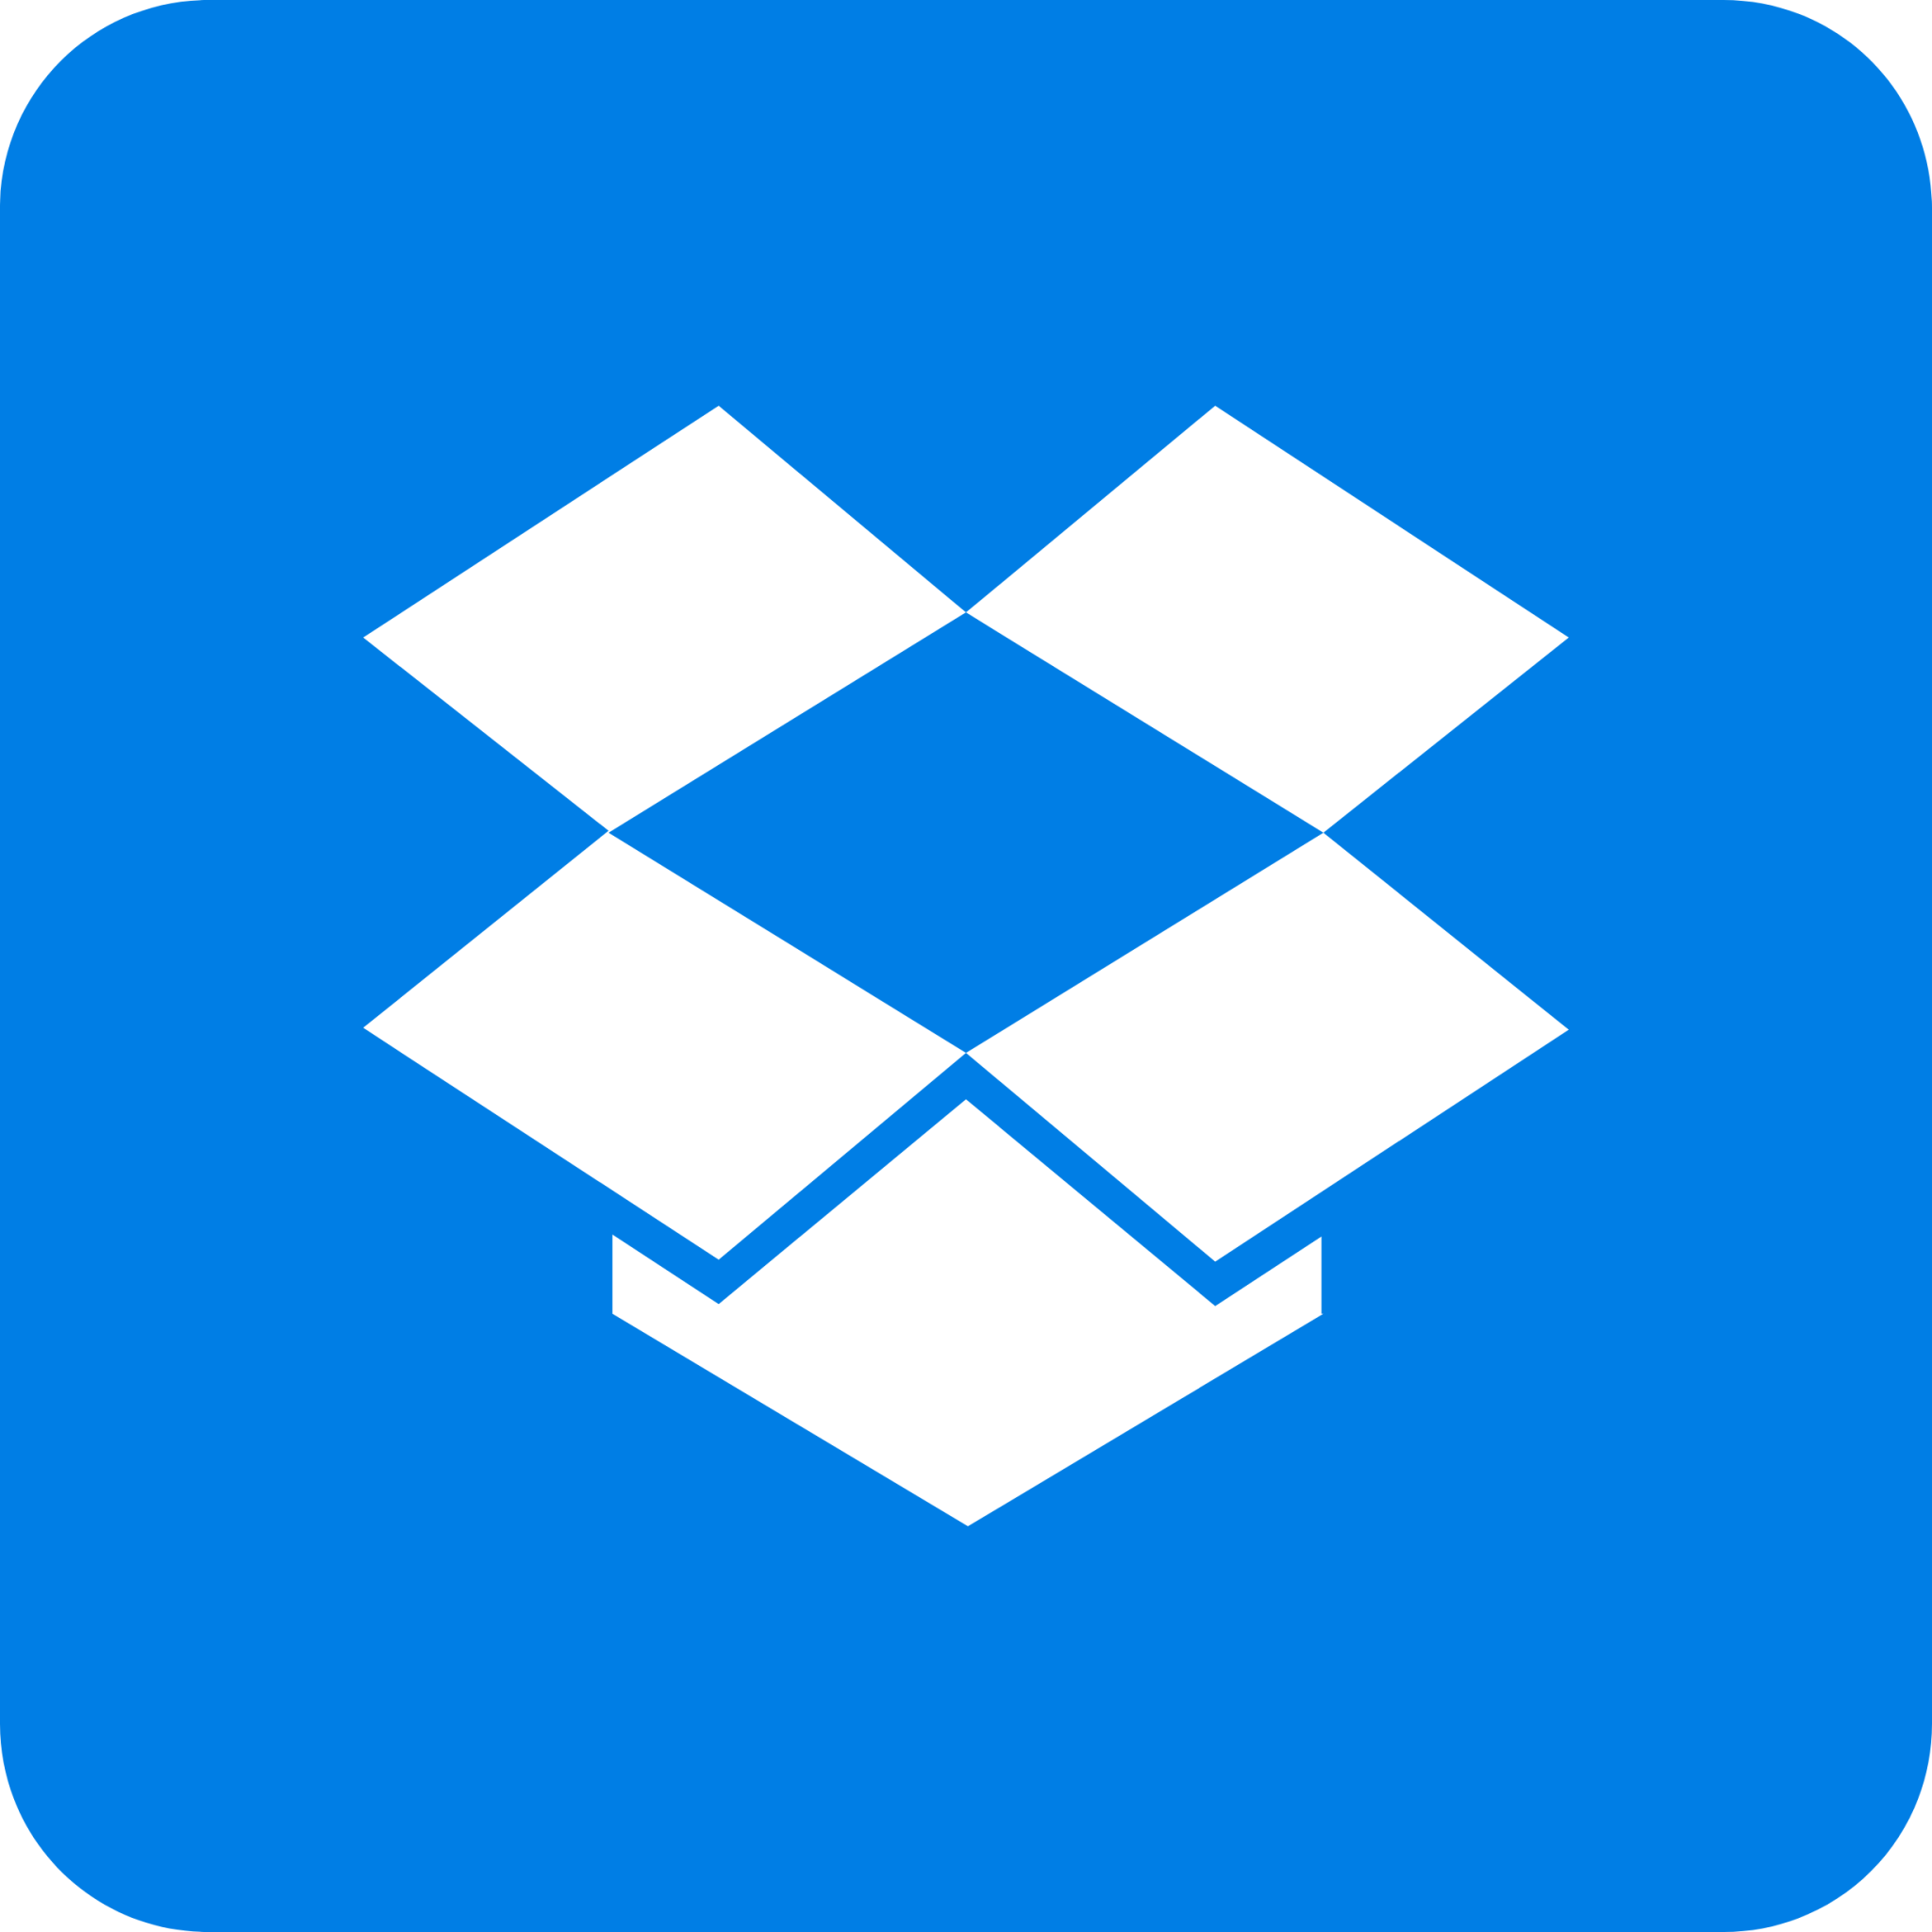 dropbox rounded icon